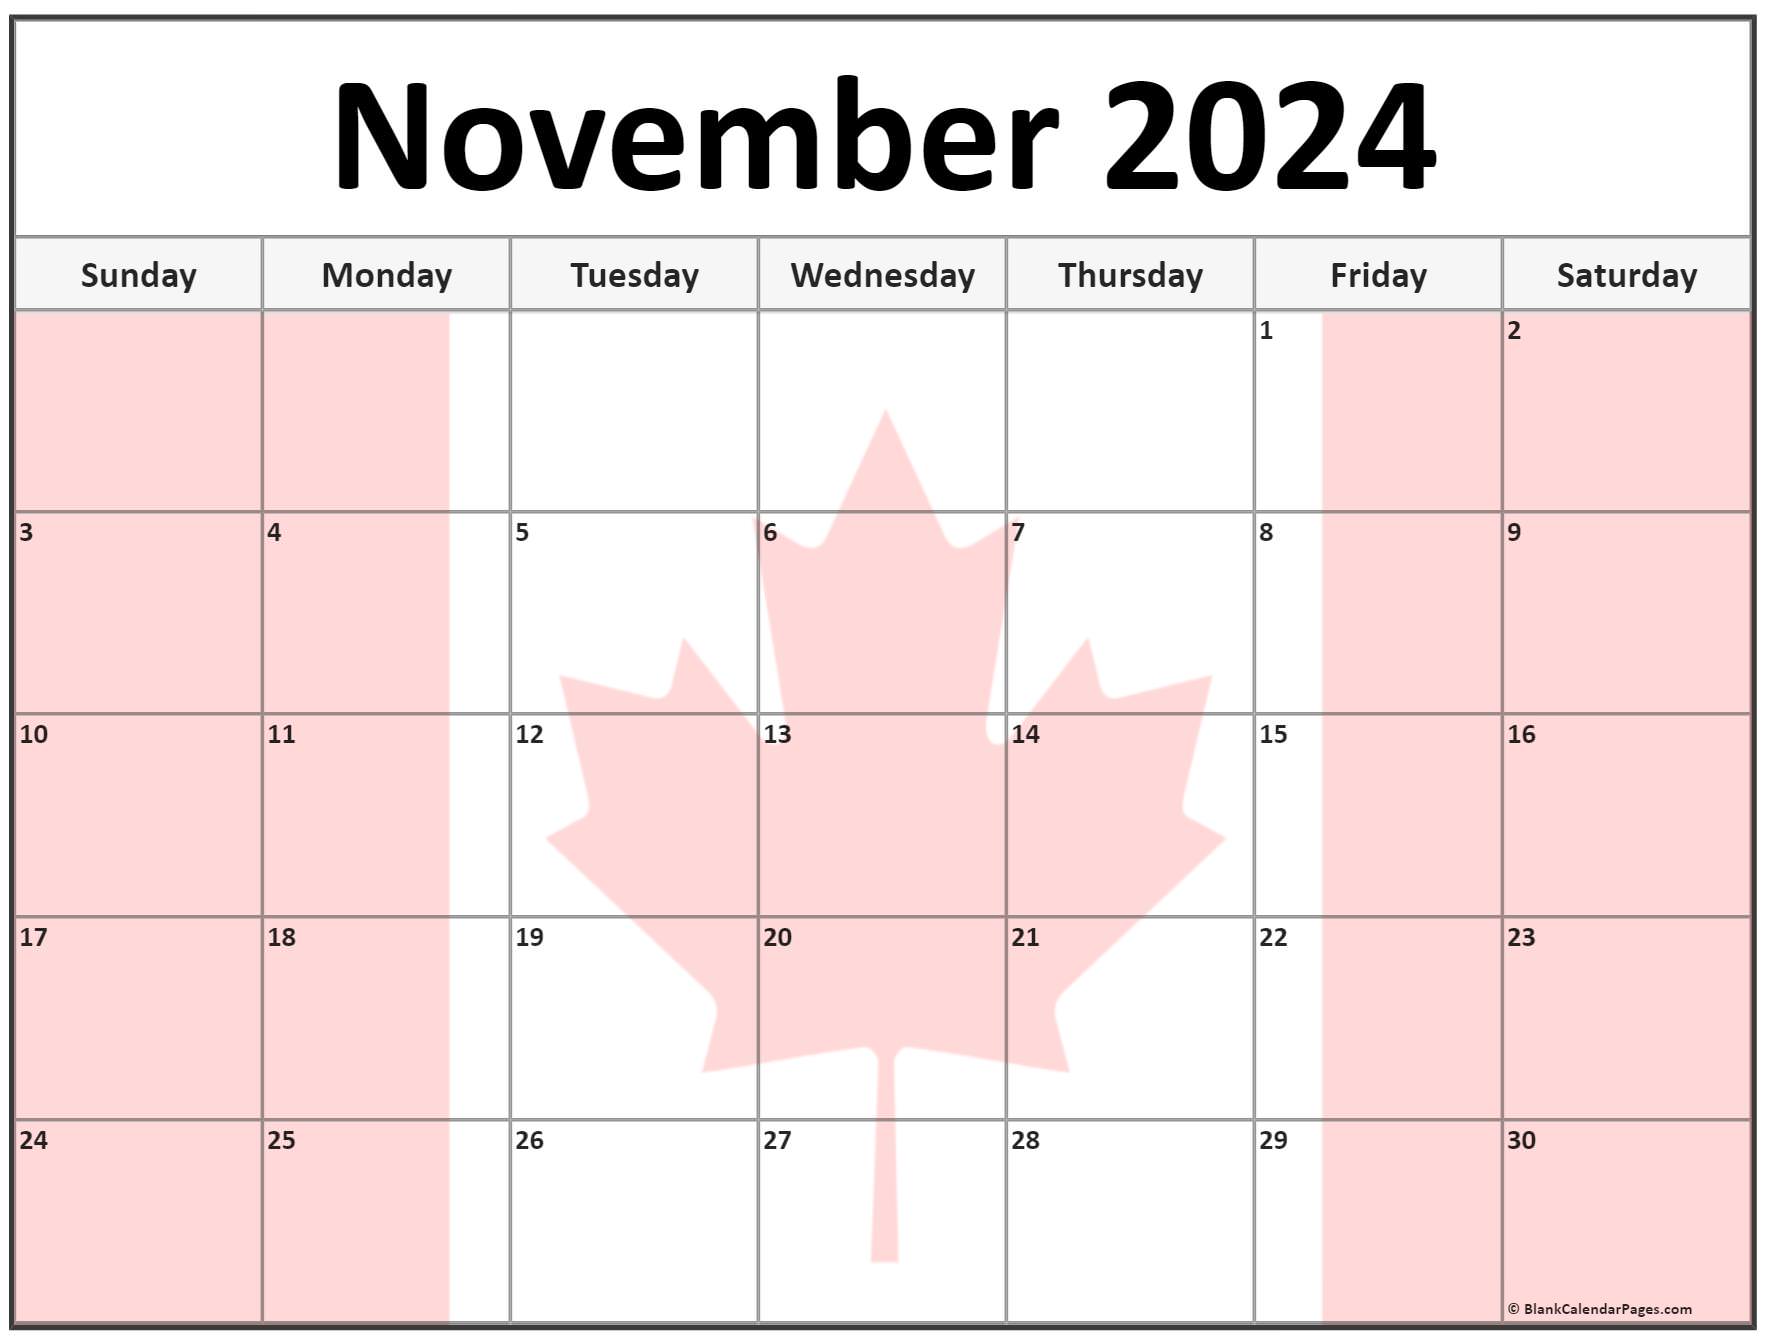 collection of november 2022 photo calendars with image filters